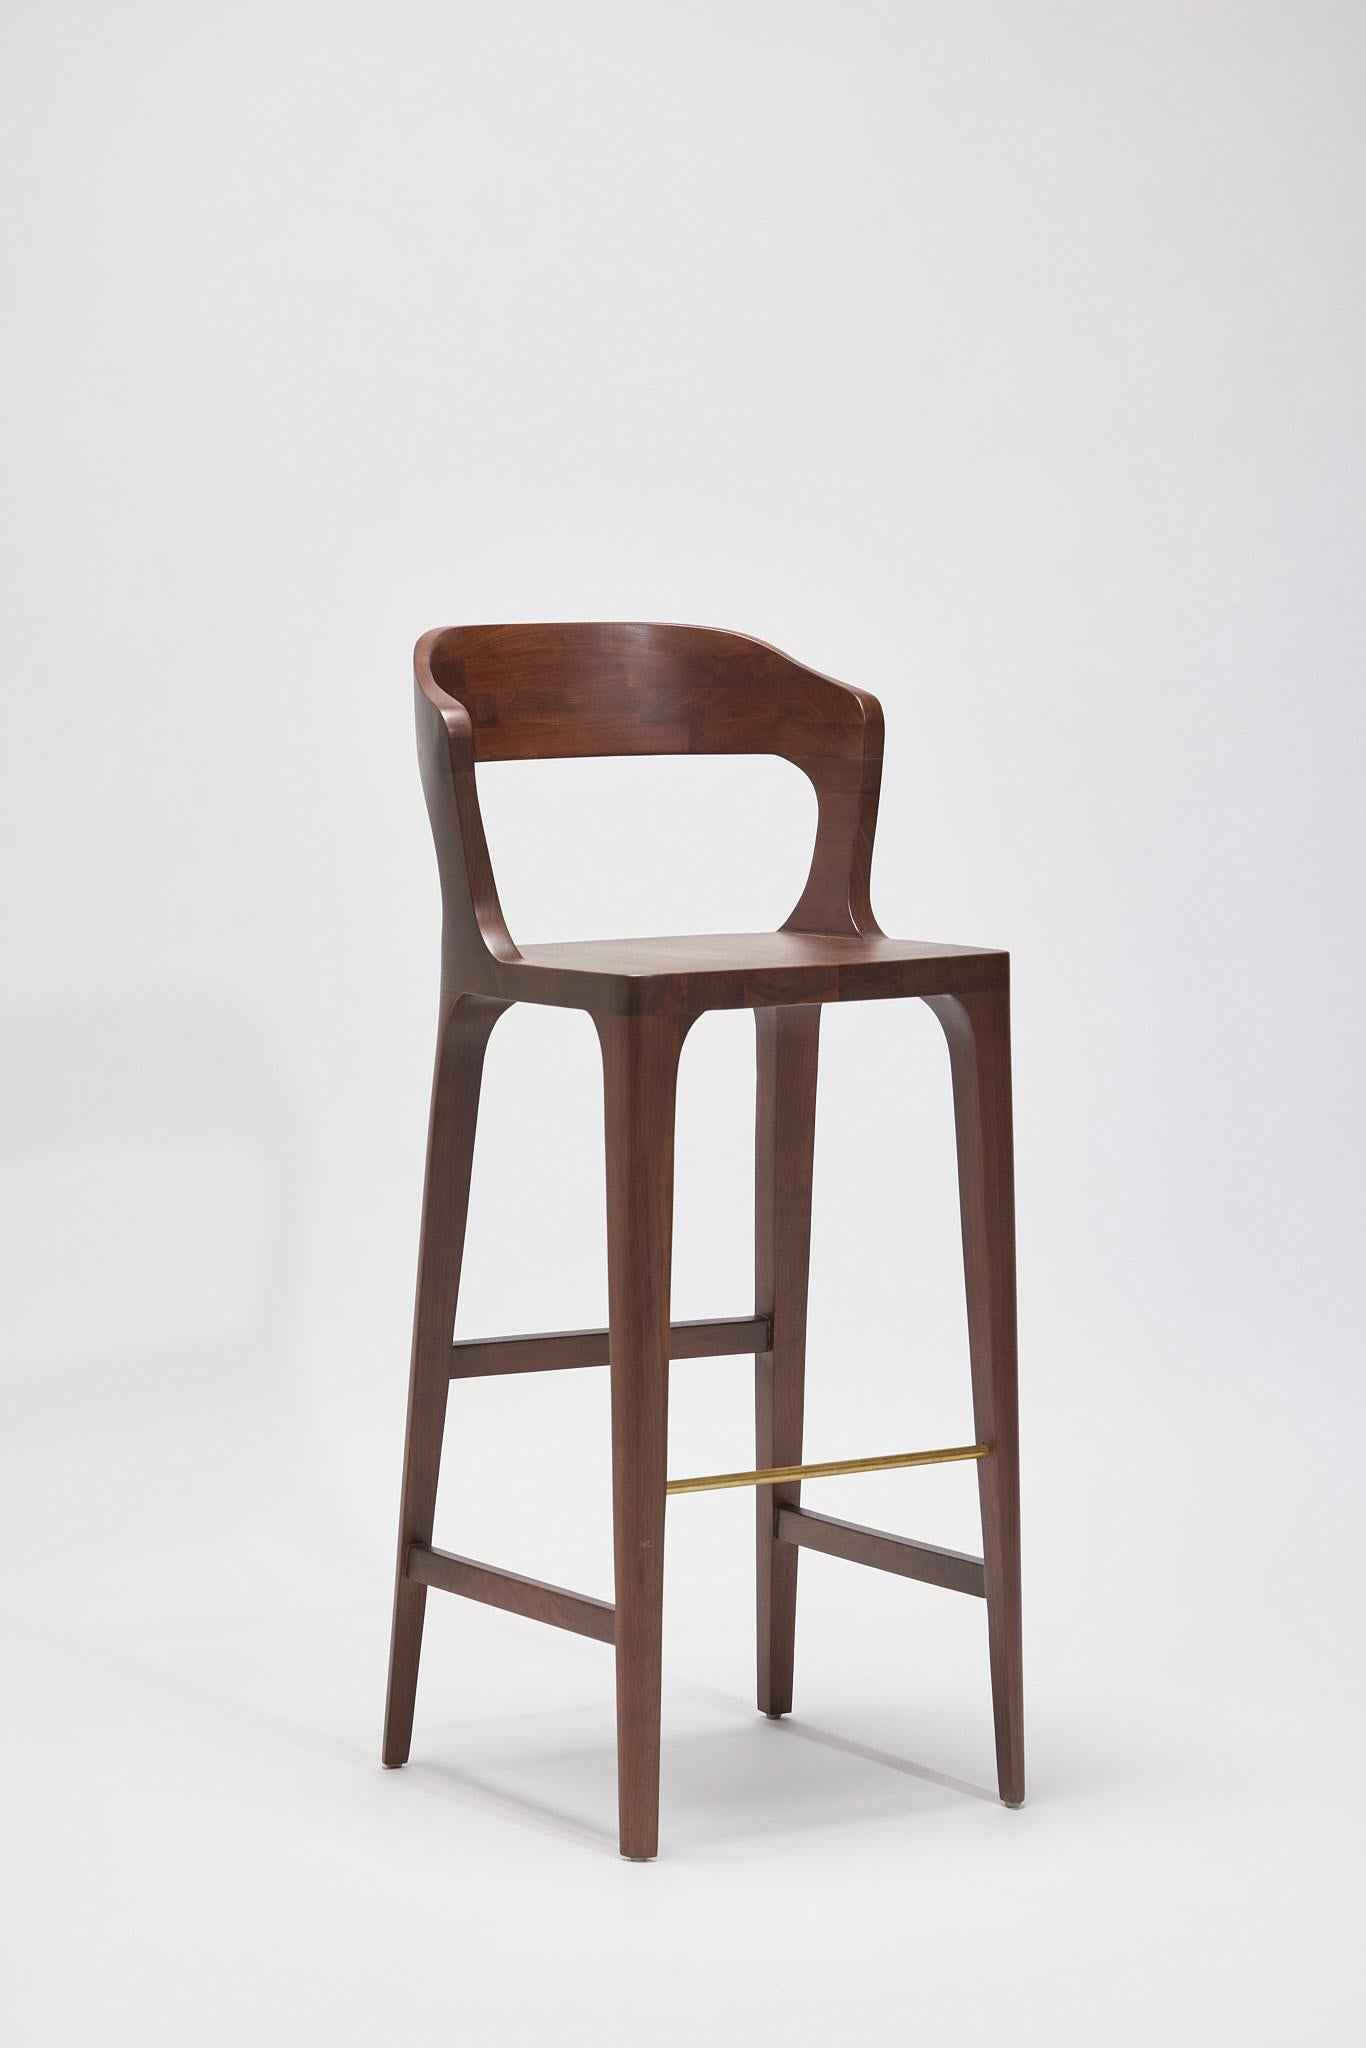 Comfortable bar stool, in US Walnut with an oiled finish

If fineness had to be incarnated by one object, without hesitation the Eileen
Chair would be it. A particular base, with a disturbing sensuality. The
delicateness of walnut invite to take